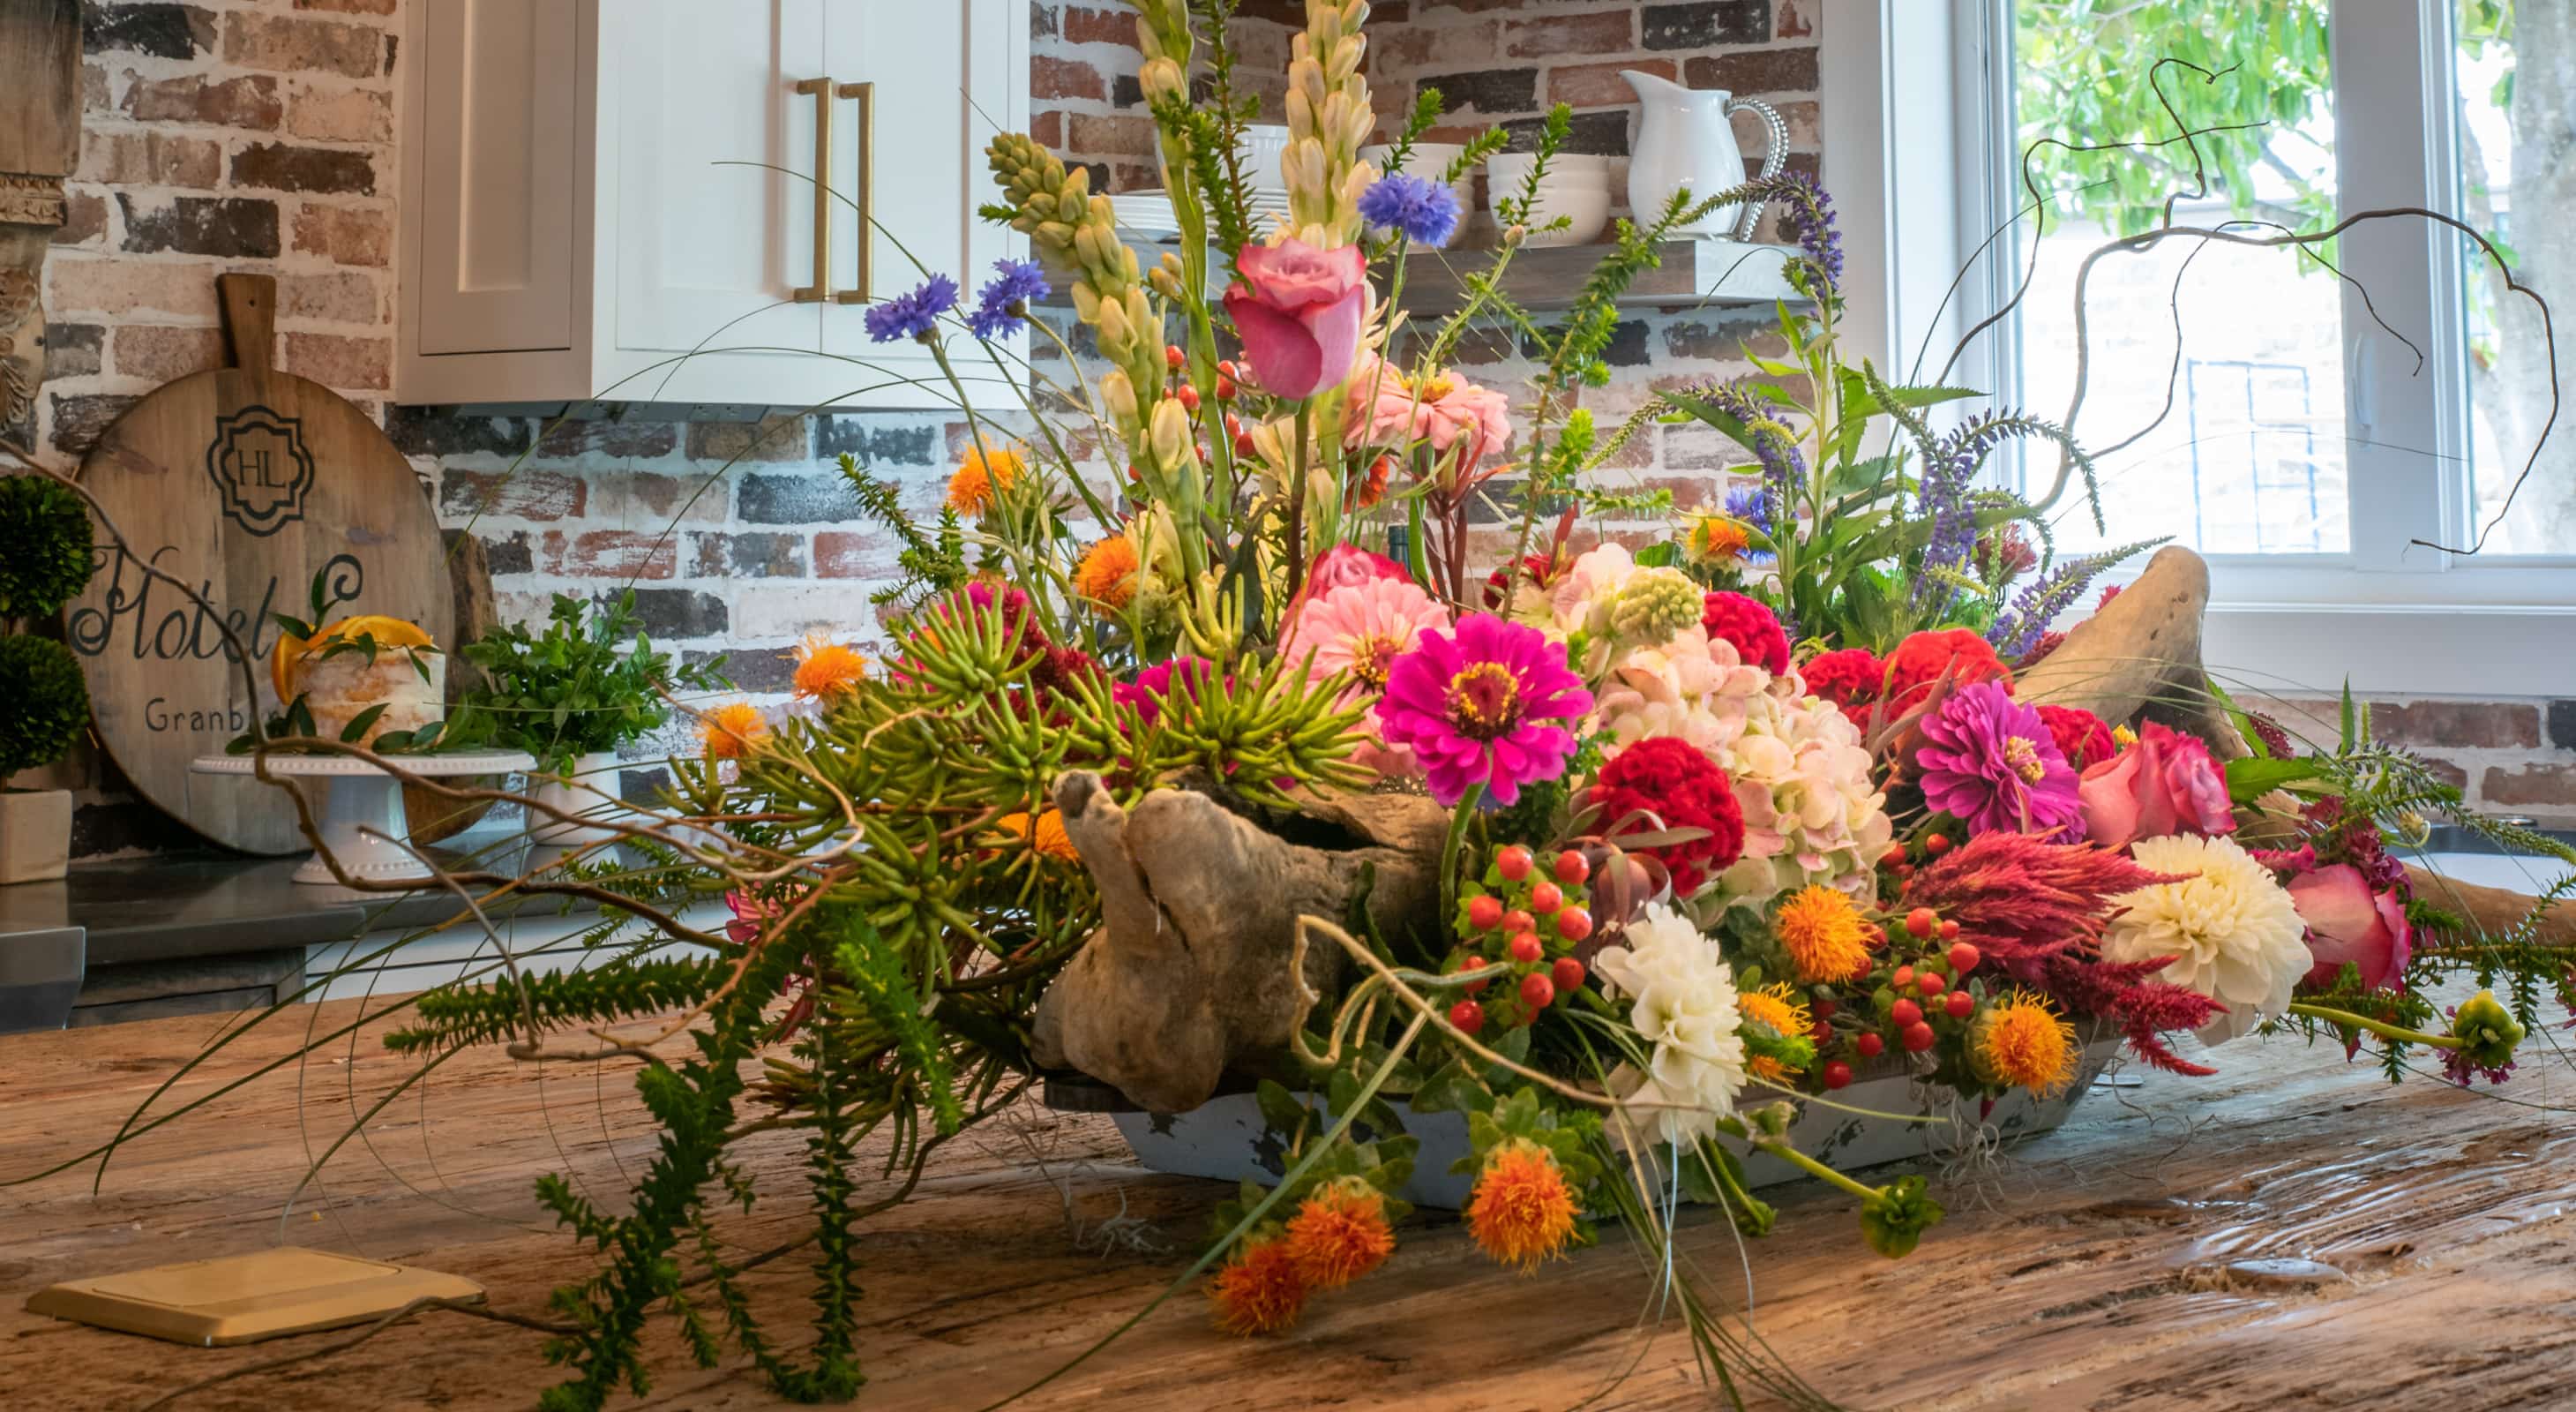 Large bouquet of flowers on a table